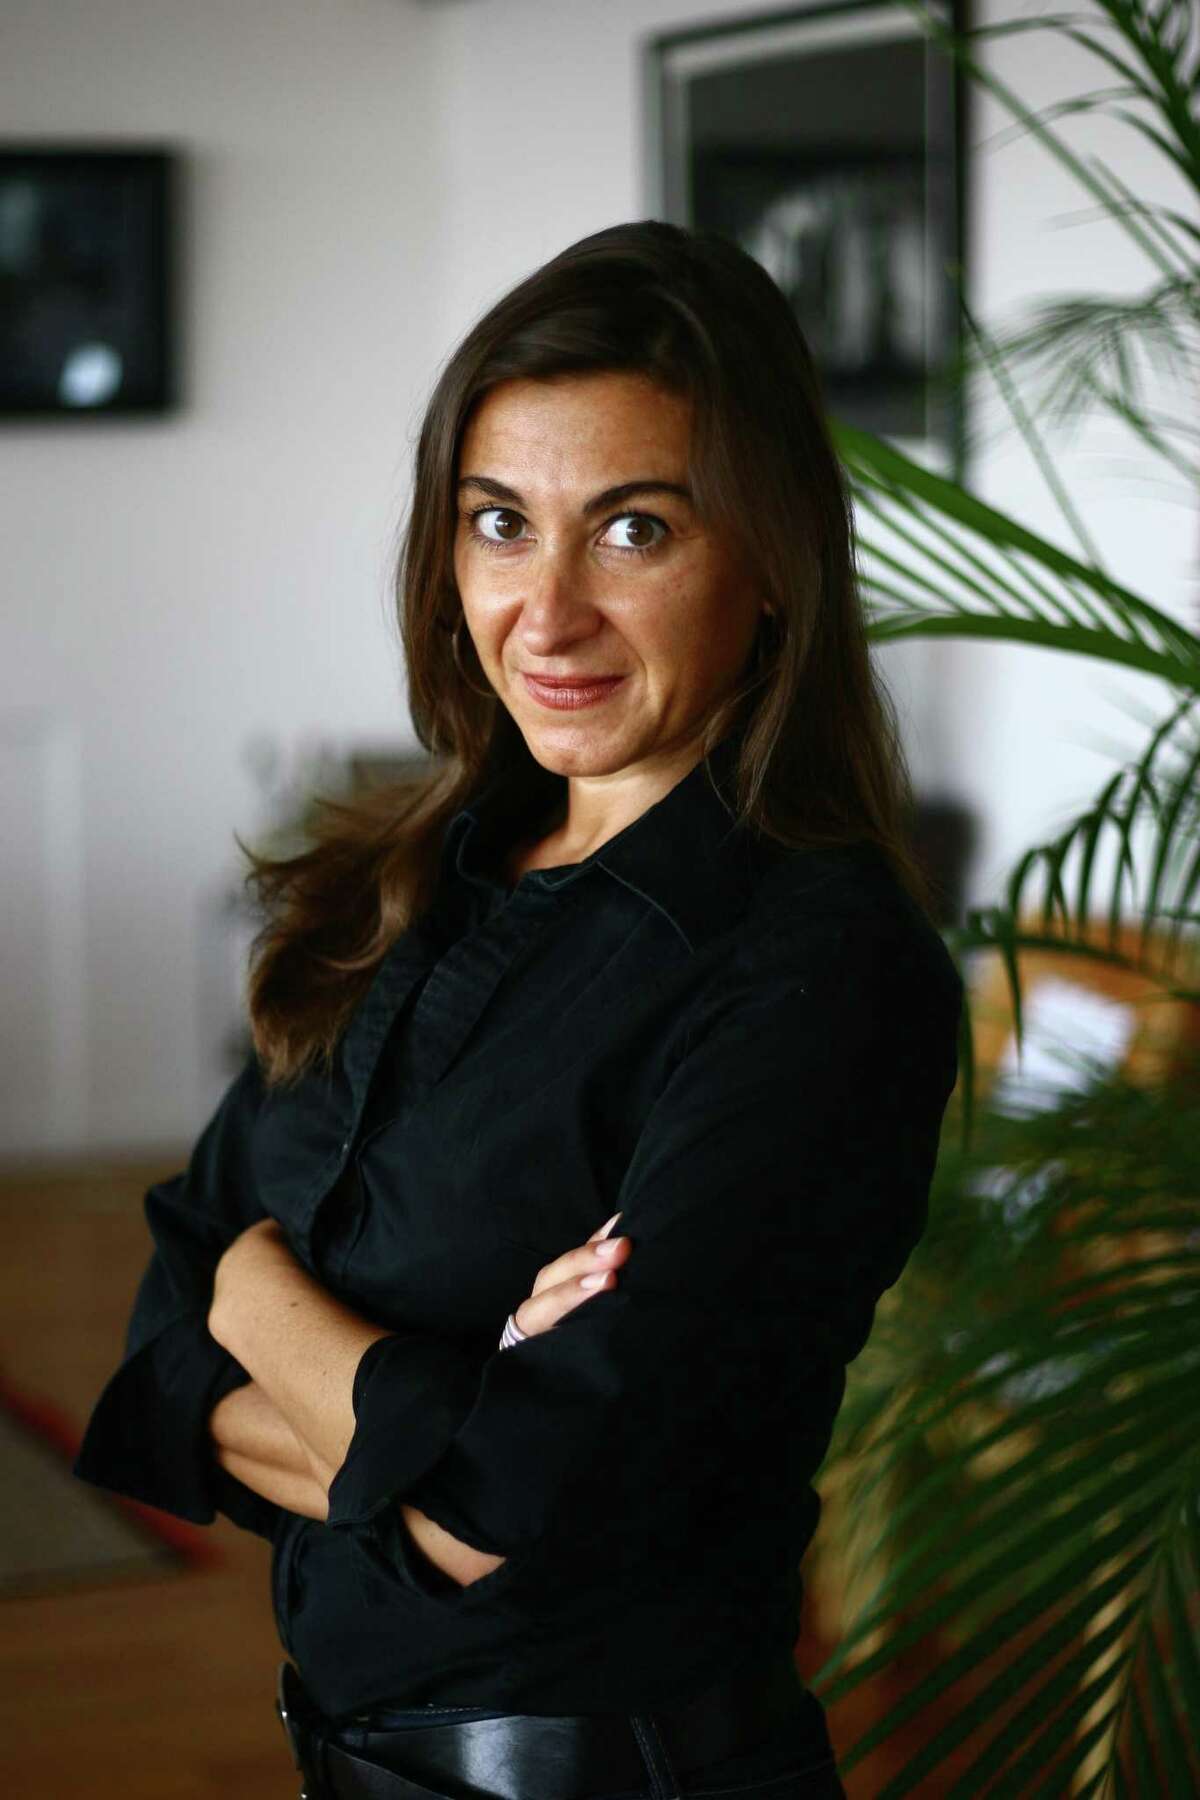 In this October 17, 2009 photo, Lynsey Addario, a photographer for The New York Times, is shown in Turkey. Addario and three other Times journalists covering the fighting in Libya were reported missing Wednesday, March 16, 2011, and the newspaper held out hope that they were alive and in the custody of the Libyan government.